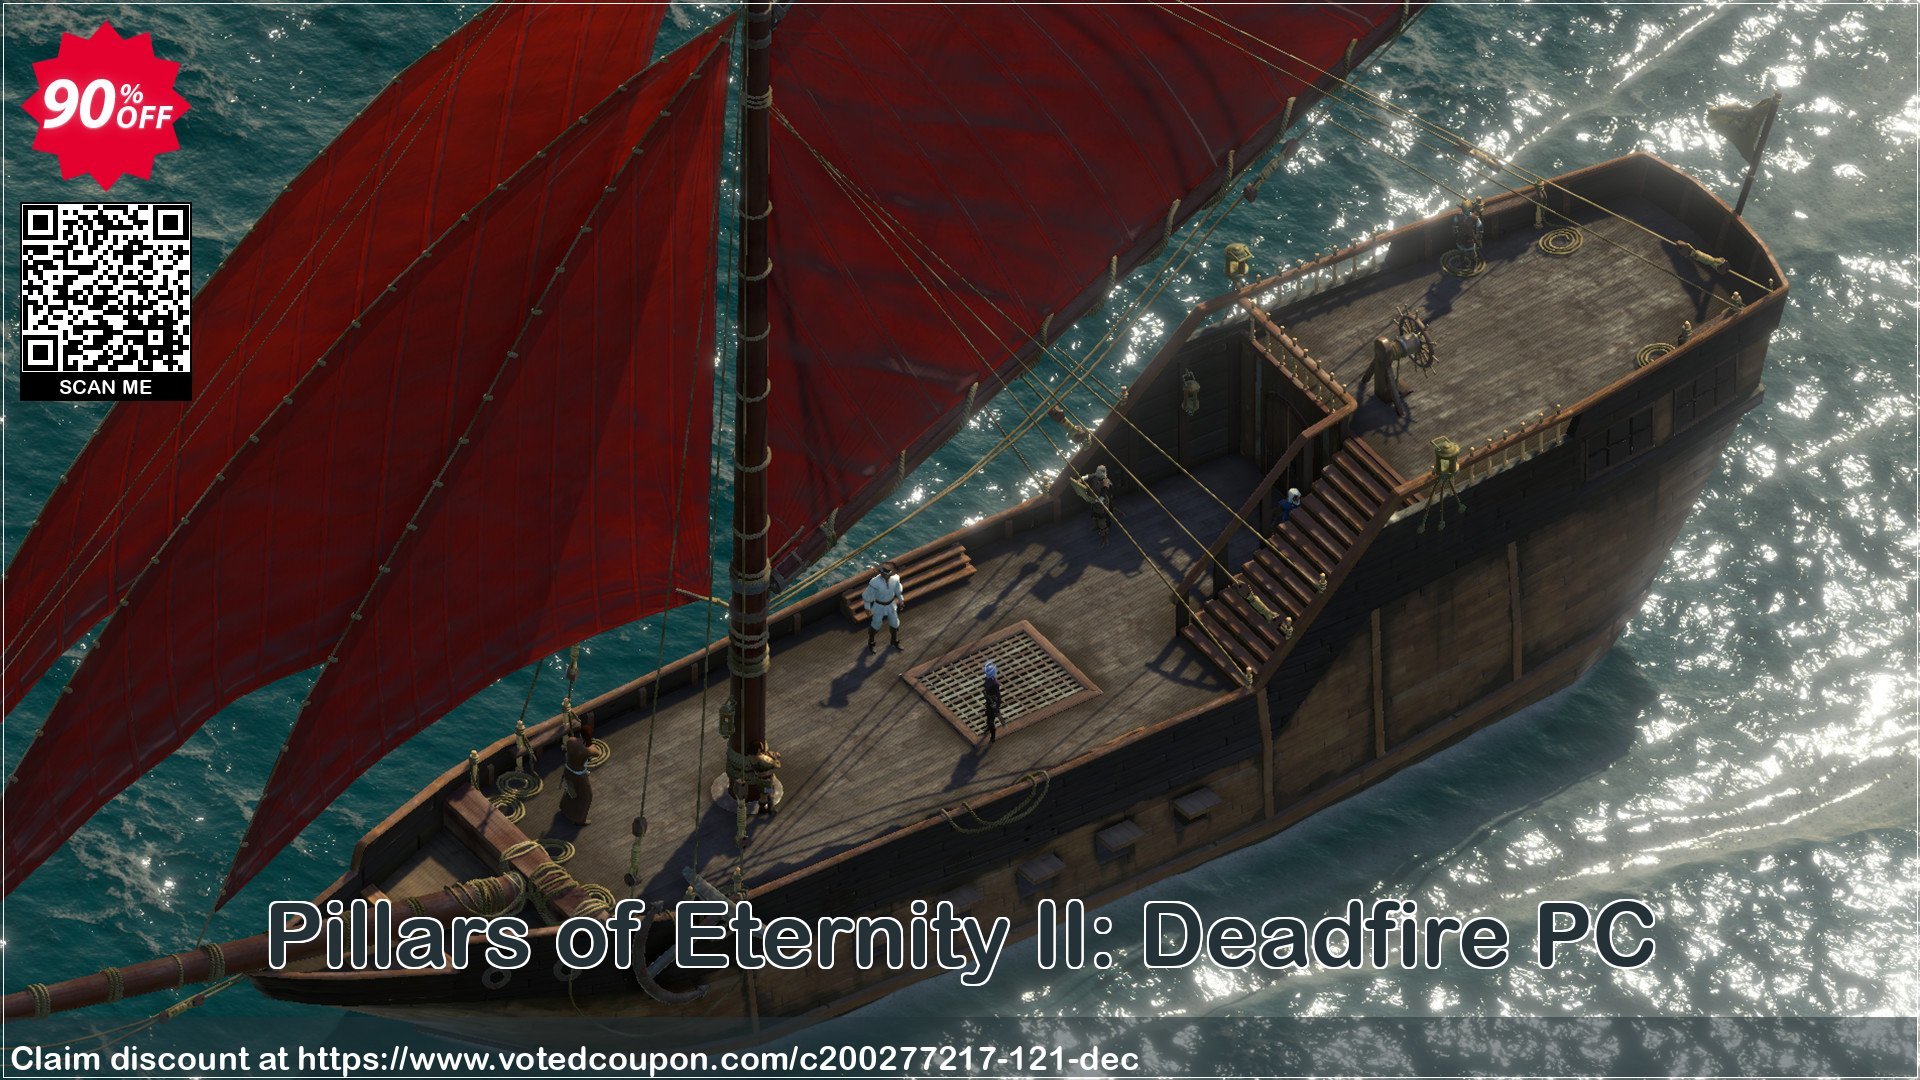 Pillars of Eternity II: Deadfire PC voted-on promotion codes